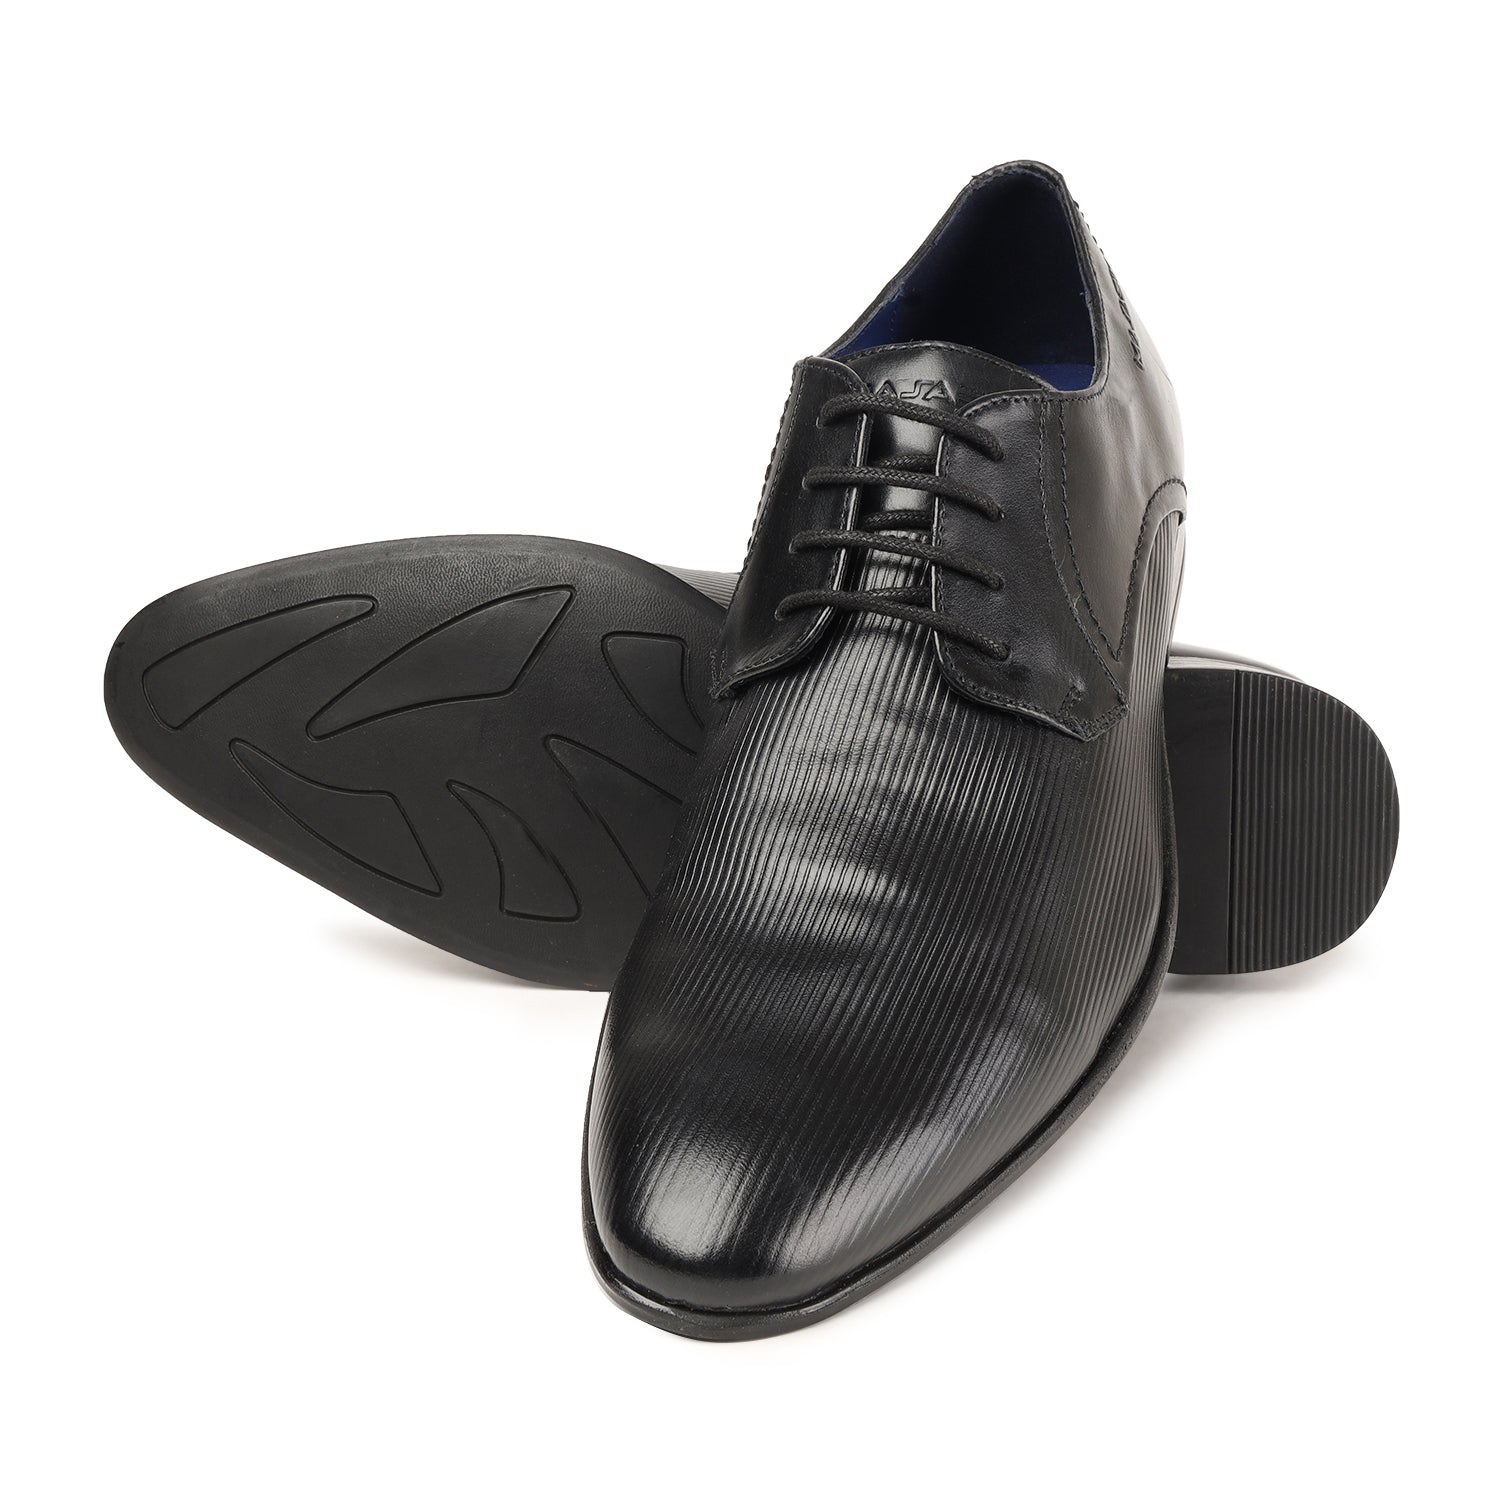 MASABIH GENUINE LEATHER DERBY LACEUP SHOES FOR MEN BLACK